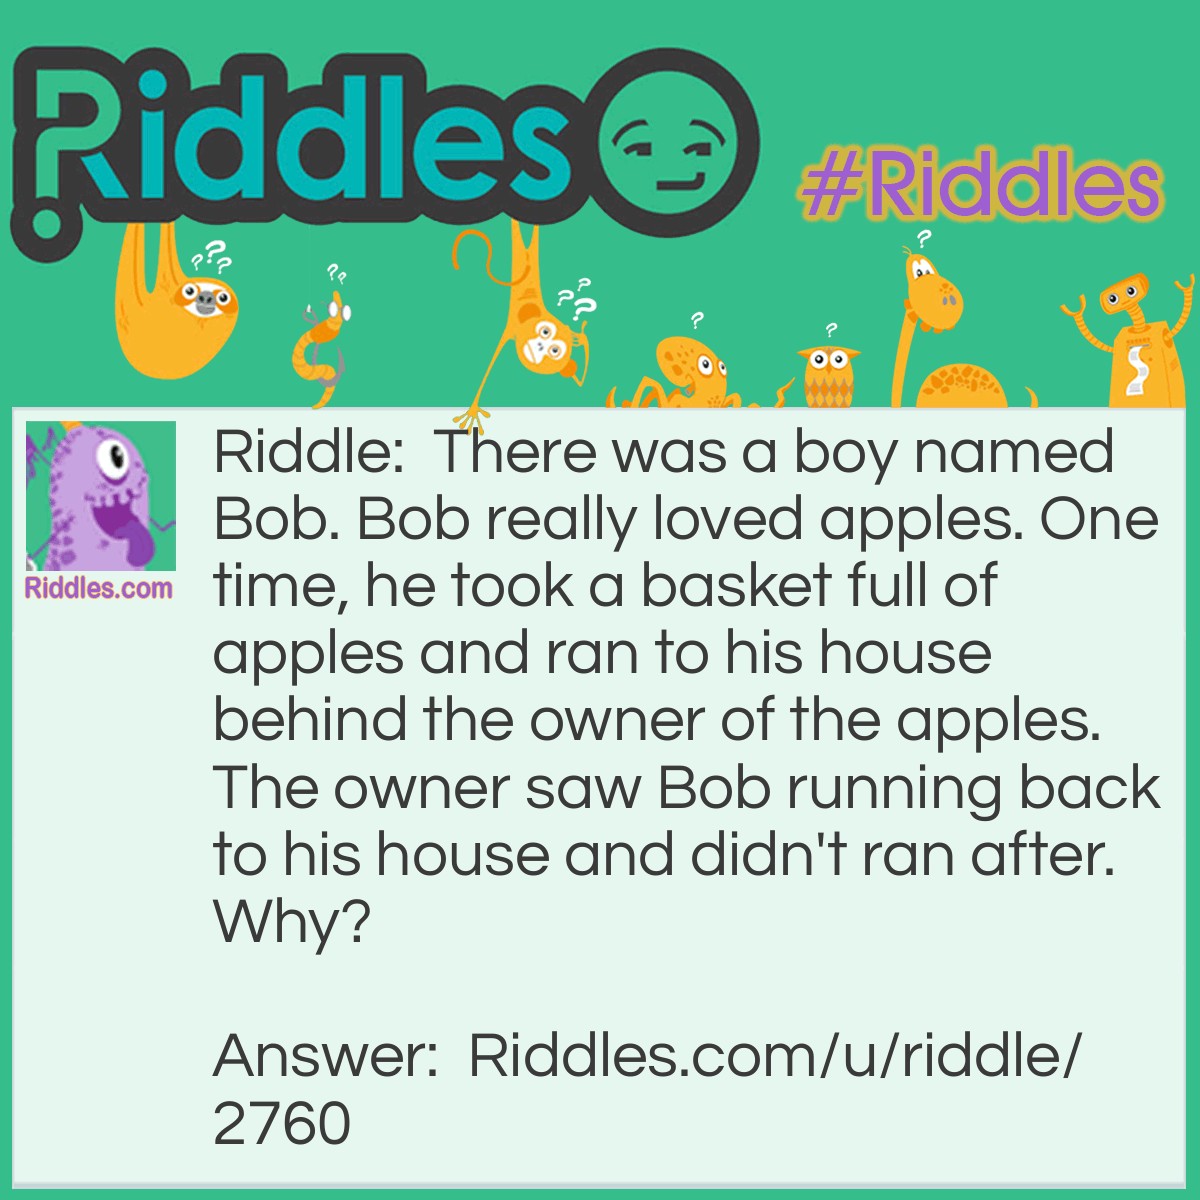 Riddle: There was a boy named Bob. Bob really loved apples. One time, he took a basket full of apples and ran to his house behind the owner of the apples. The owner saw Bob running back to his house and didn't ran after. Why? Answer: The basket of apples are free.